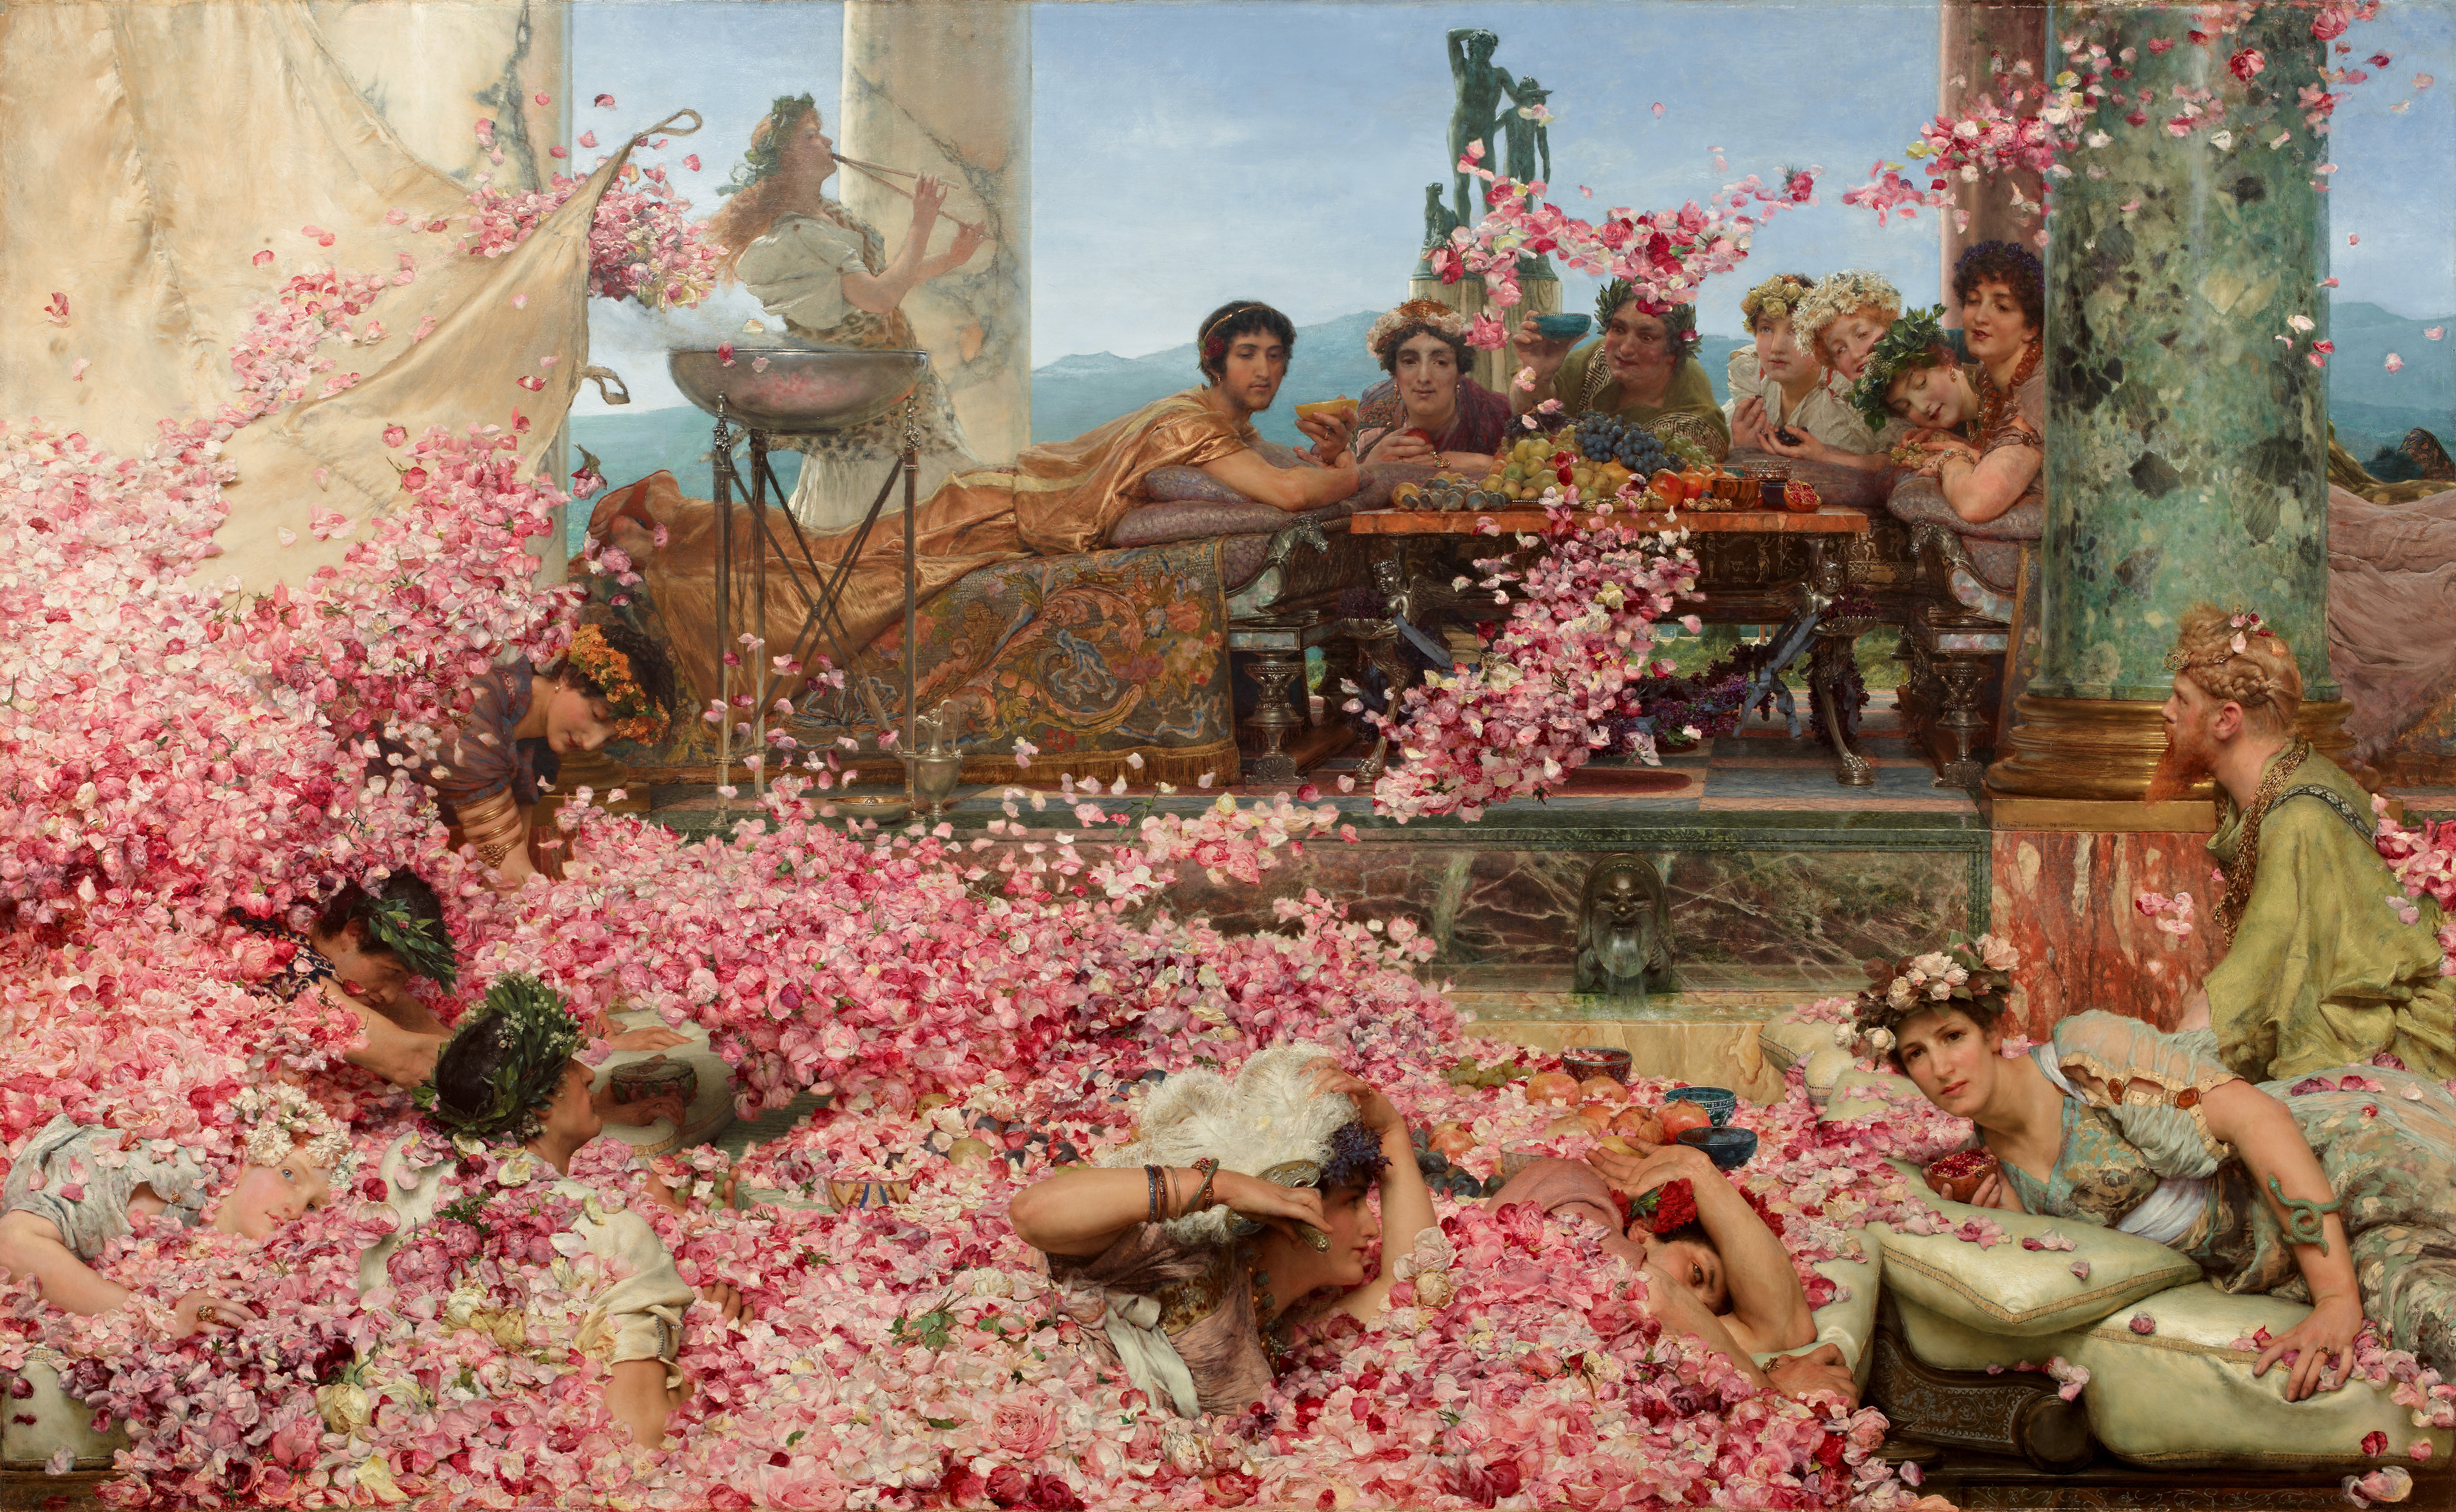 The Roses of Hileogabalus, a commission painted in 1888 by Lawrence Alma Tadema.